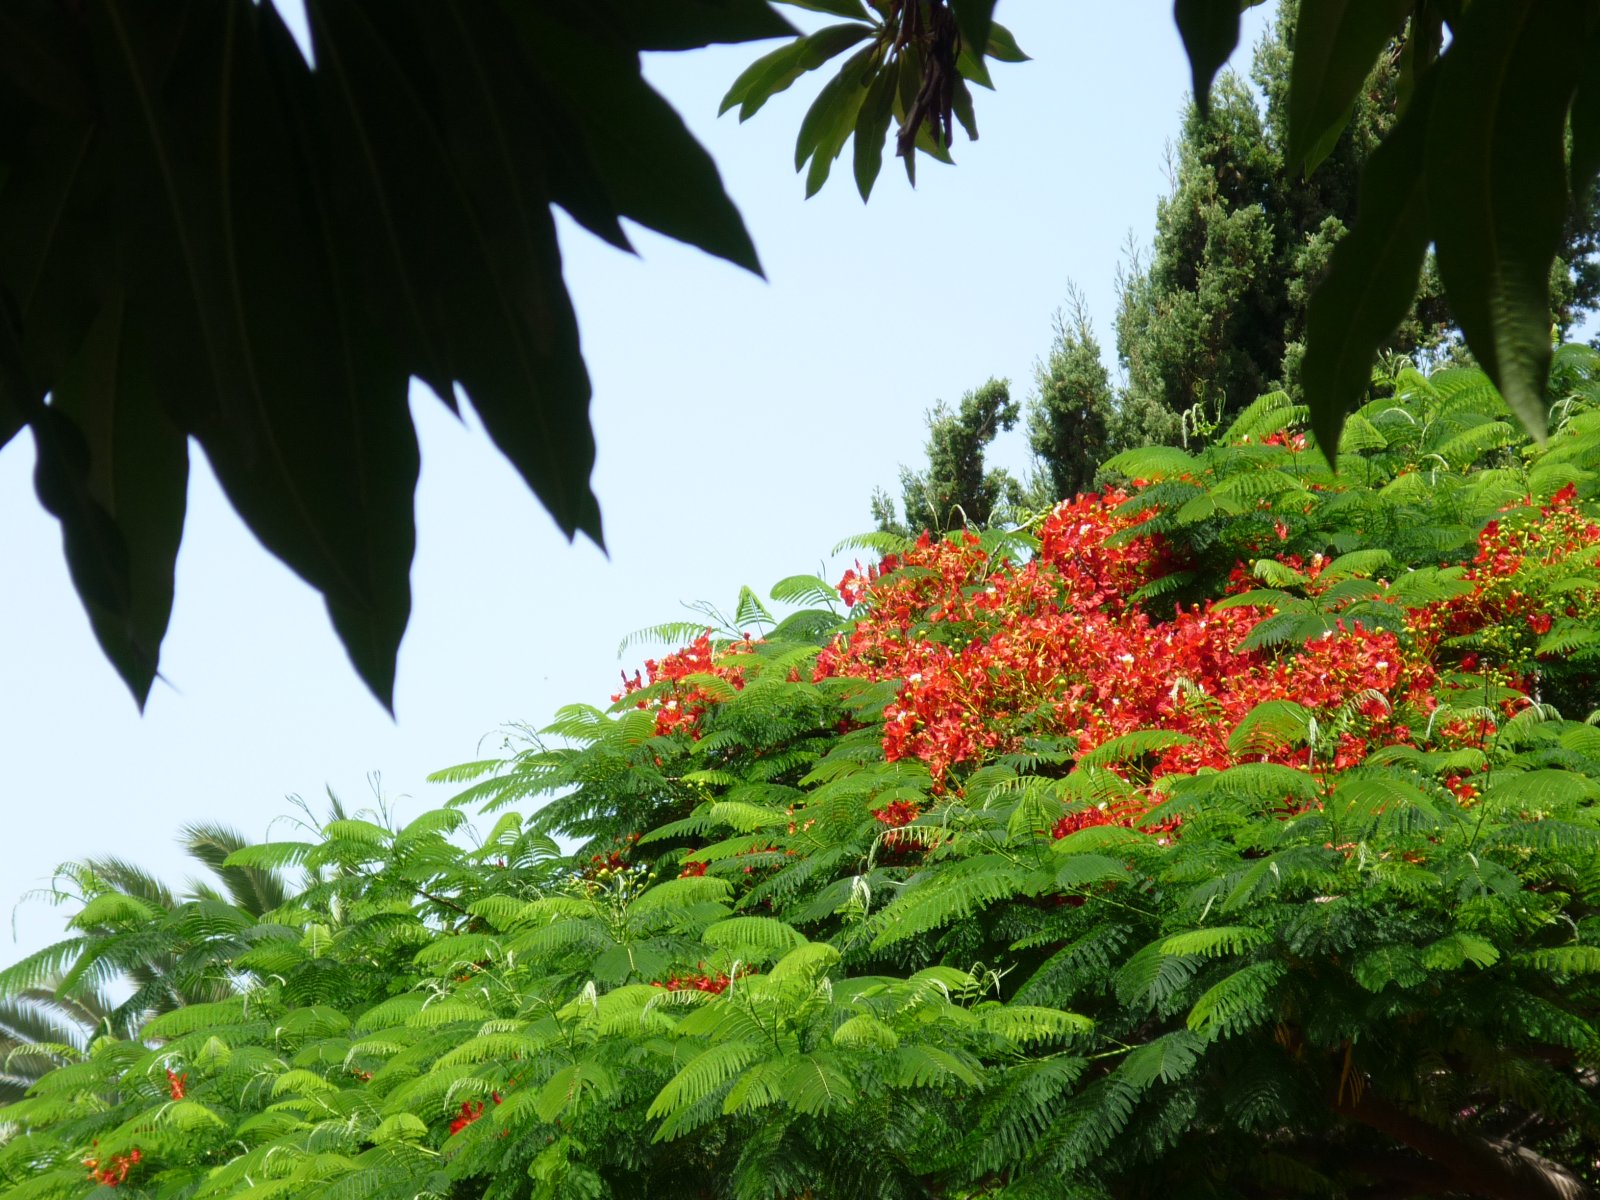 red flowers in a garden against green foliage